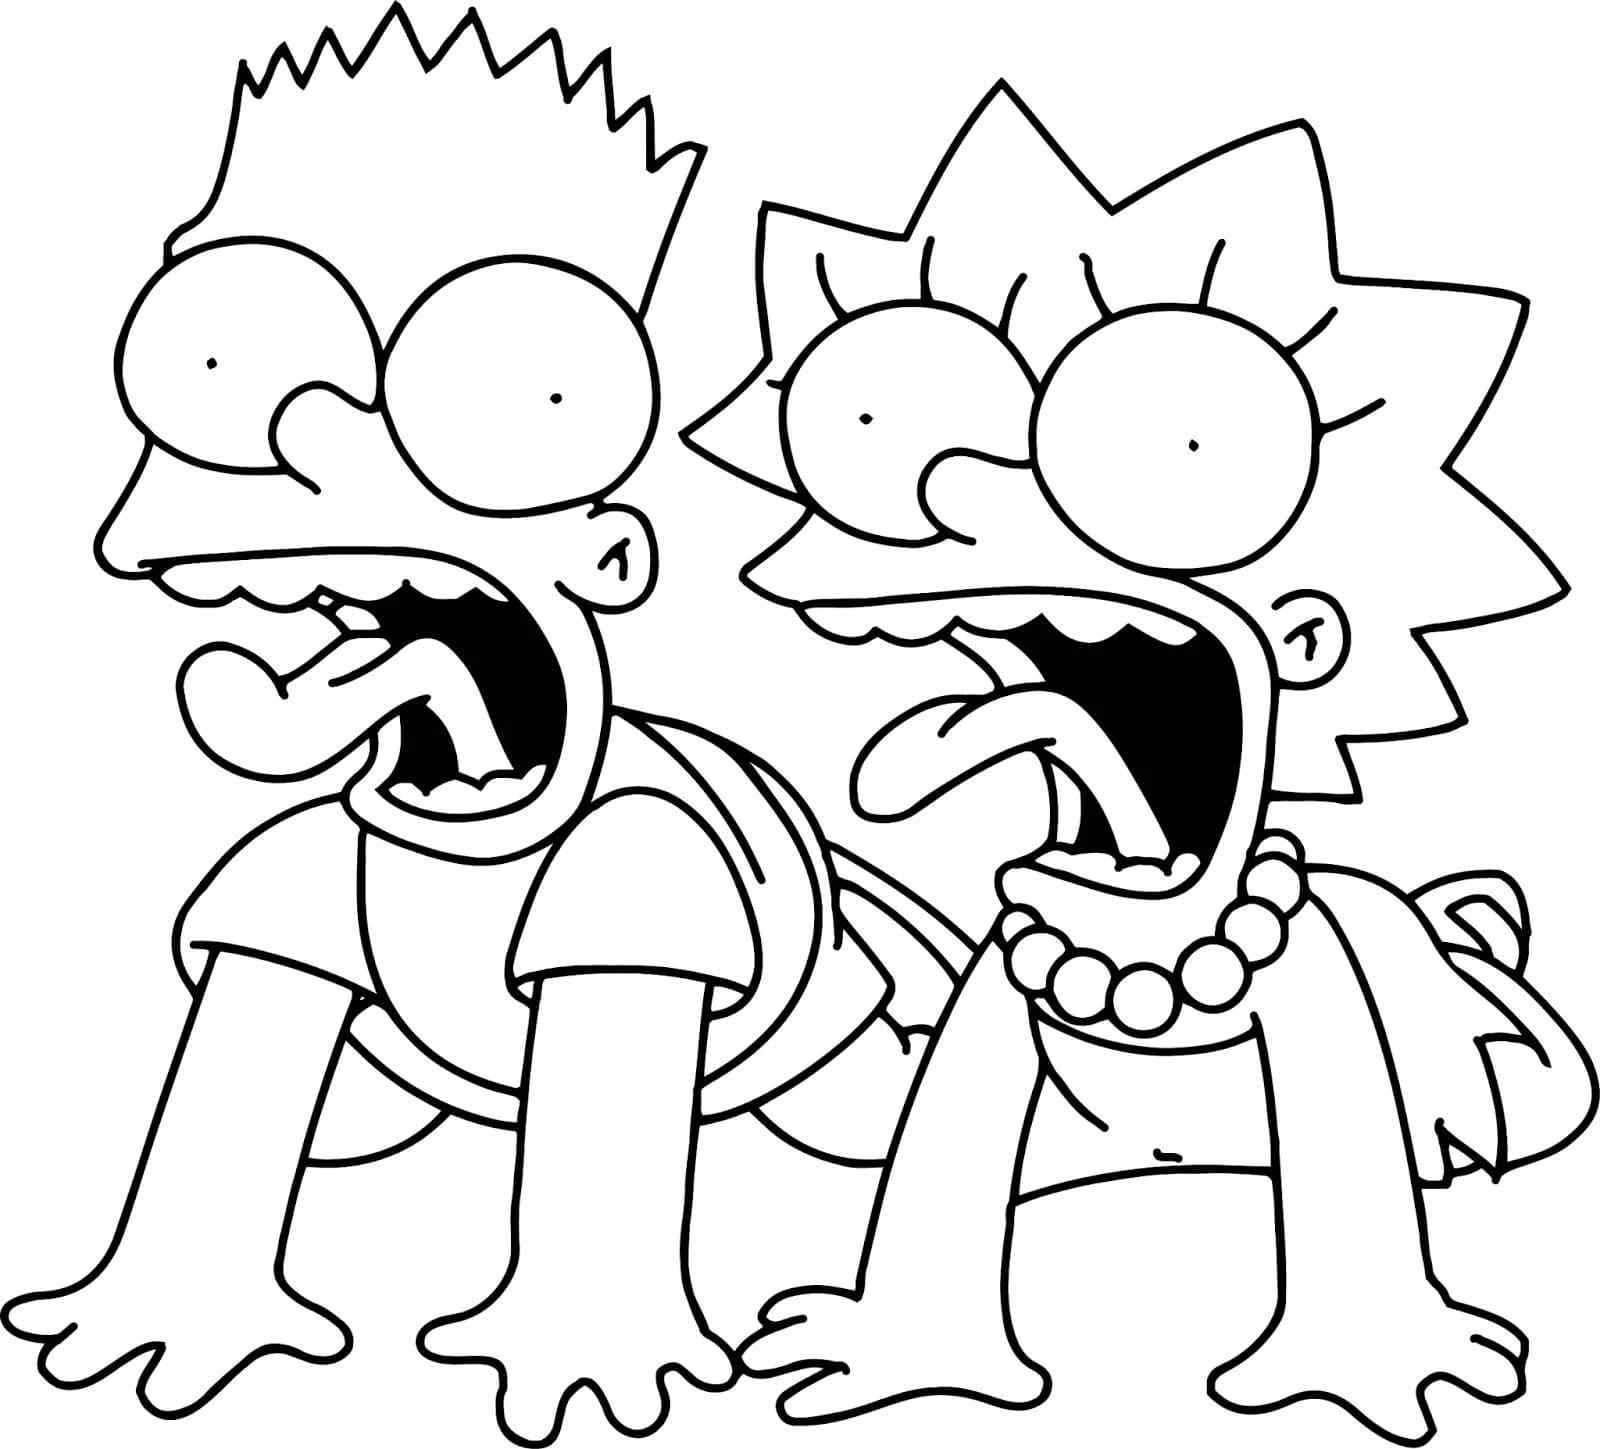 Children Scream With Fear Coloring Page